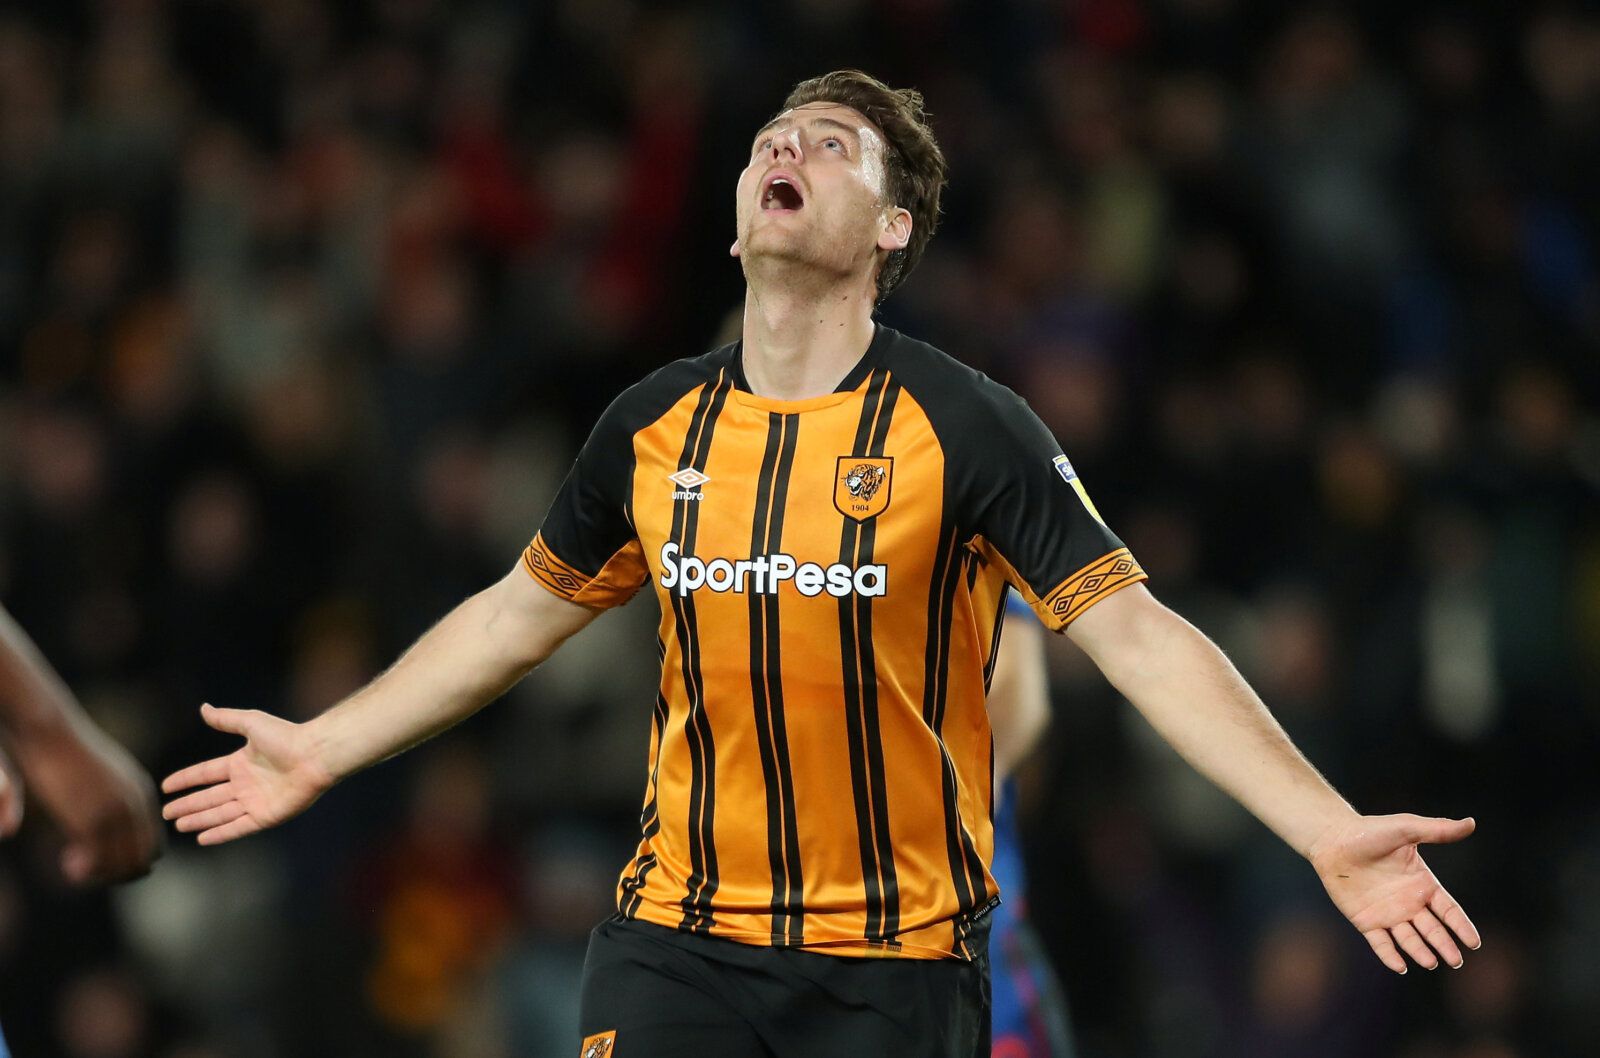 Soccer Football - Championship - Hull City v Bolton Wanderers - KCOM Stadium, Hull, Britain - January 1, 2019   Hull City's Chris Martin celebrates scoring their fourth goal    Action Images/Lee Smith    EDITORIAL USE ONLY. No use with unauthorized audio, video, data, fixture lists, club/league logos or 